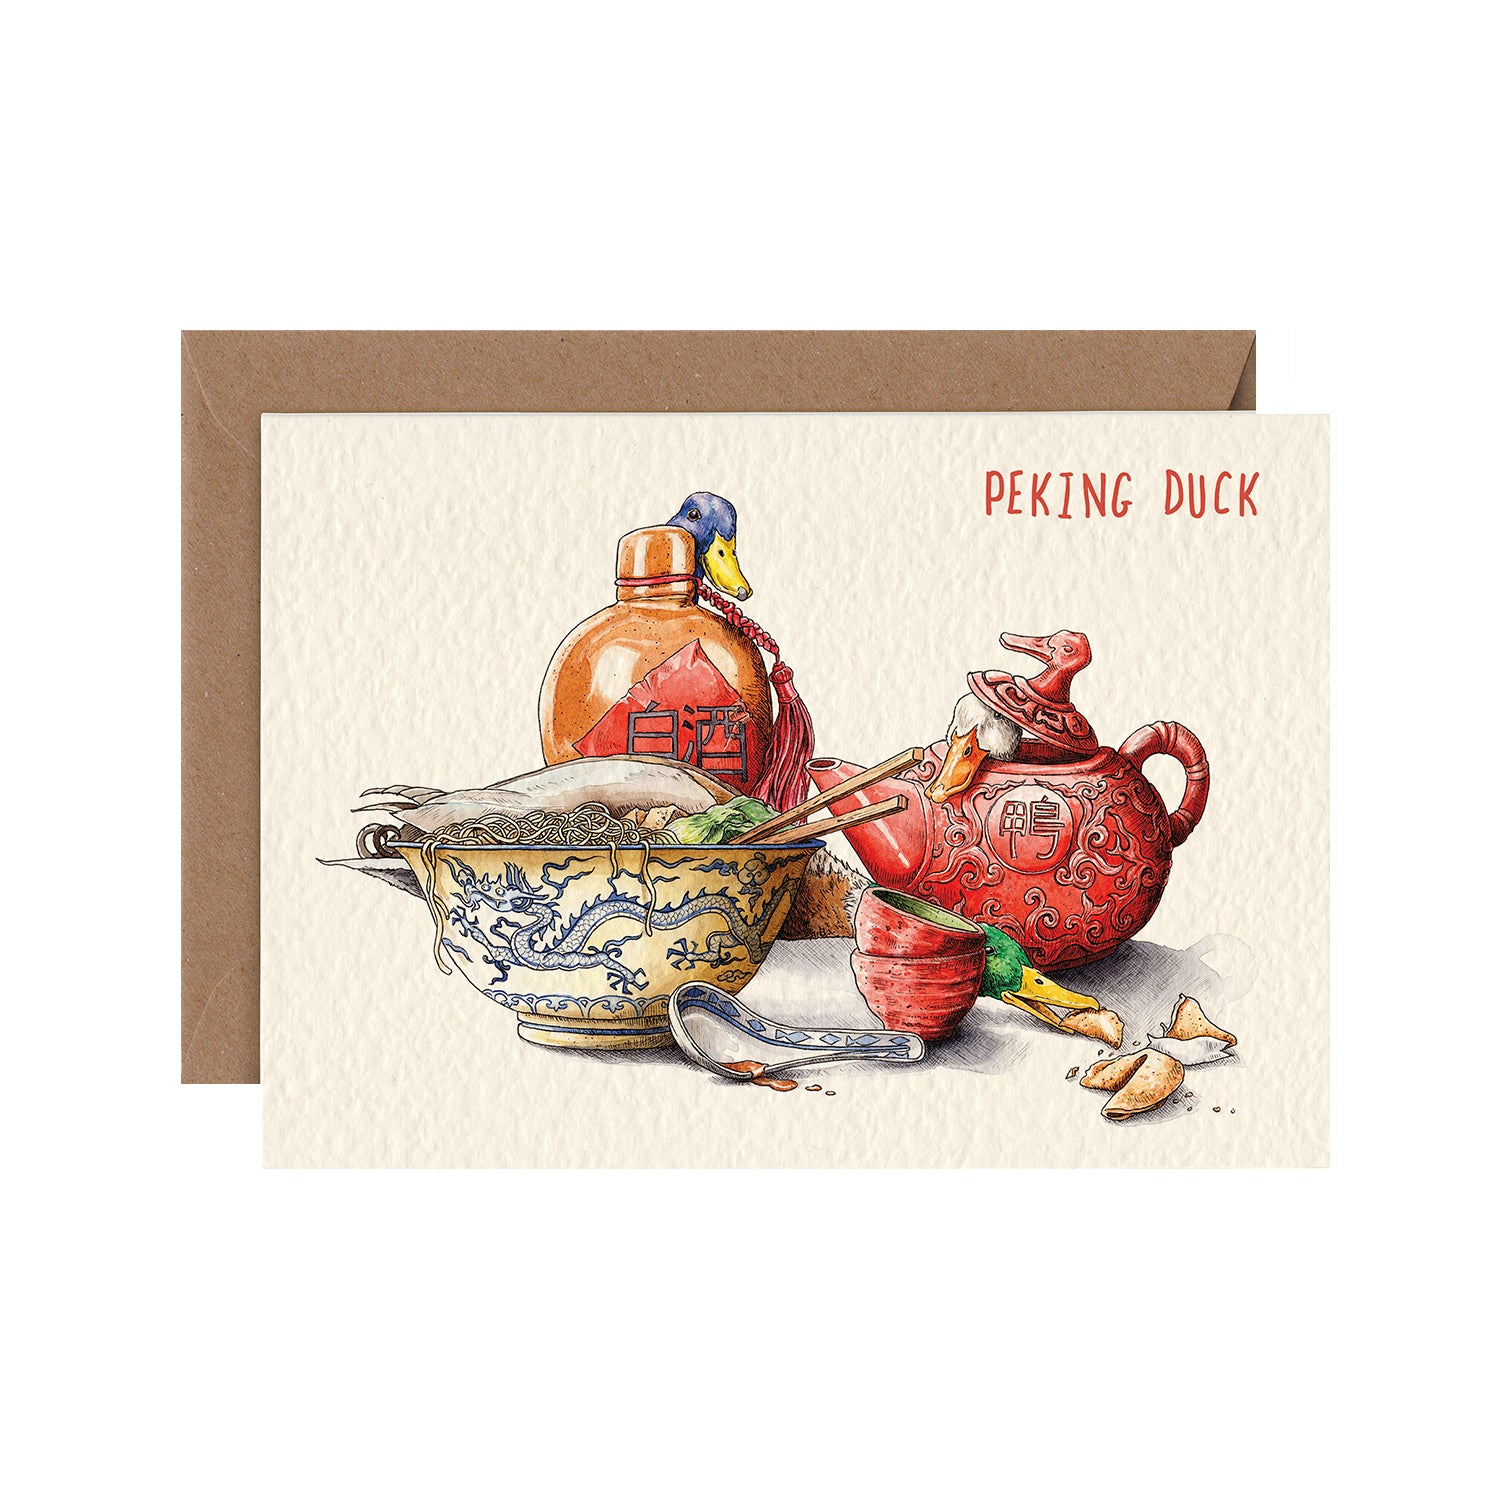 A cream card featuring ink and watercolor artwork of a meal of Chinese food in a traditional bowl with a red teapot, with the faces of two ducks peeking from behind the dishes, under the caption &quot;Peking Duck&quot;.